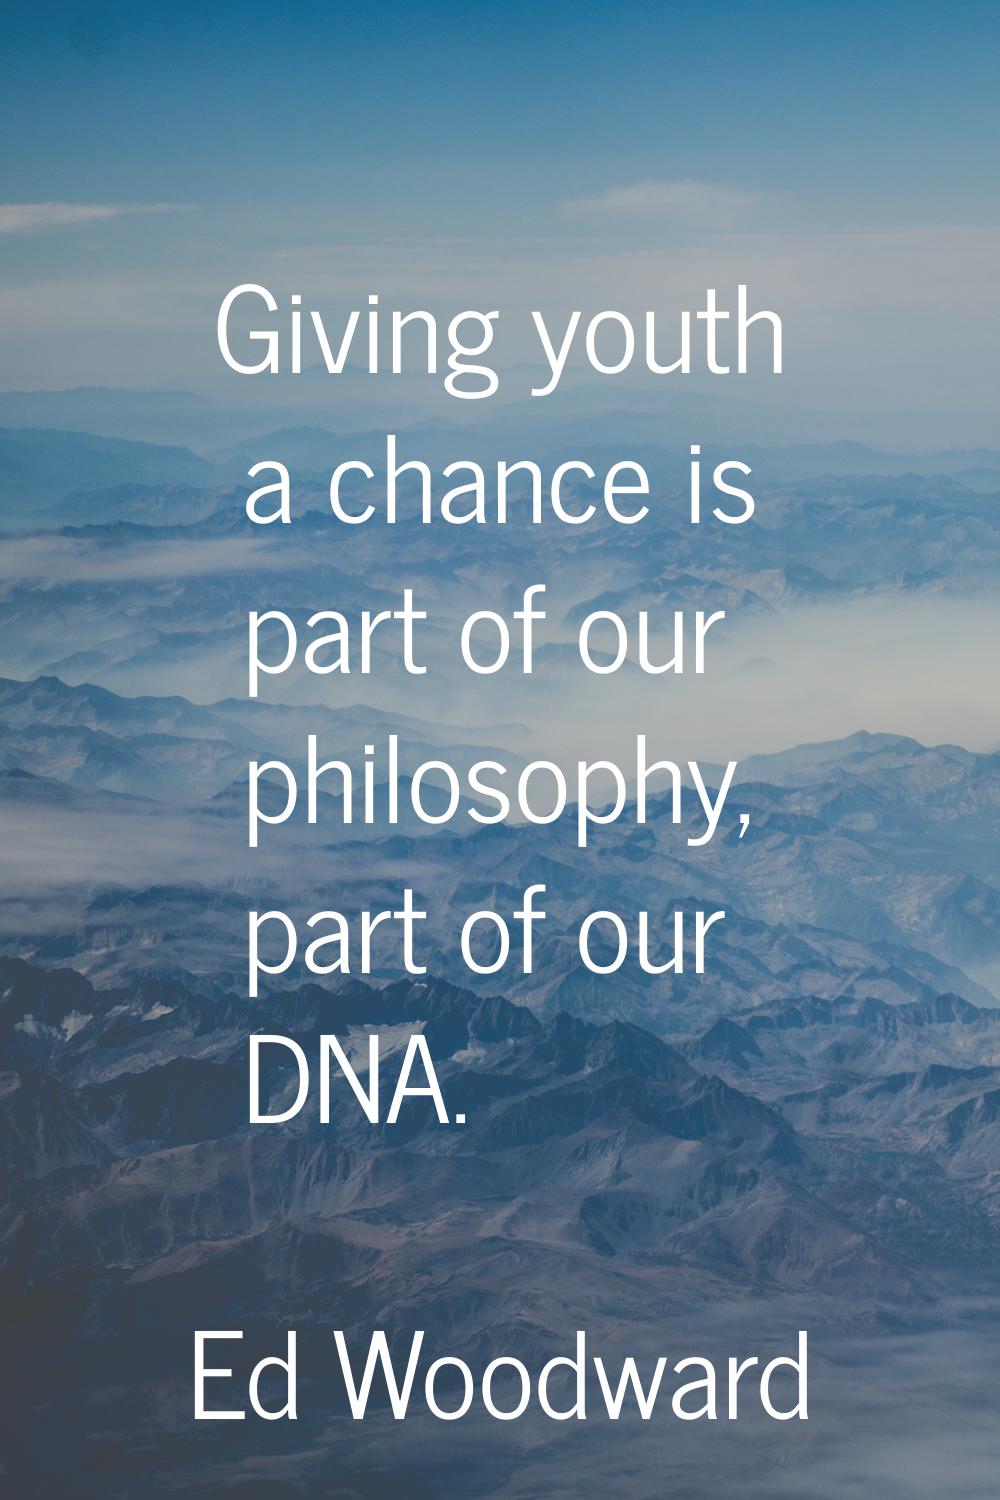 Giving youth a chance is part of our philosophy, part of our DNA.